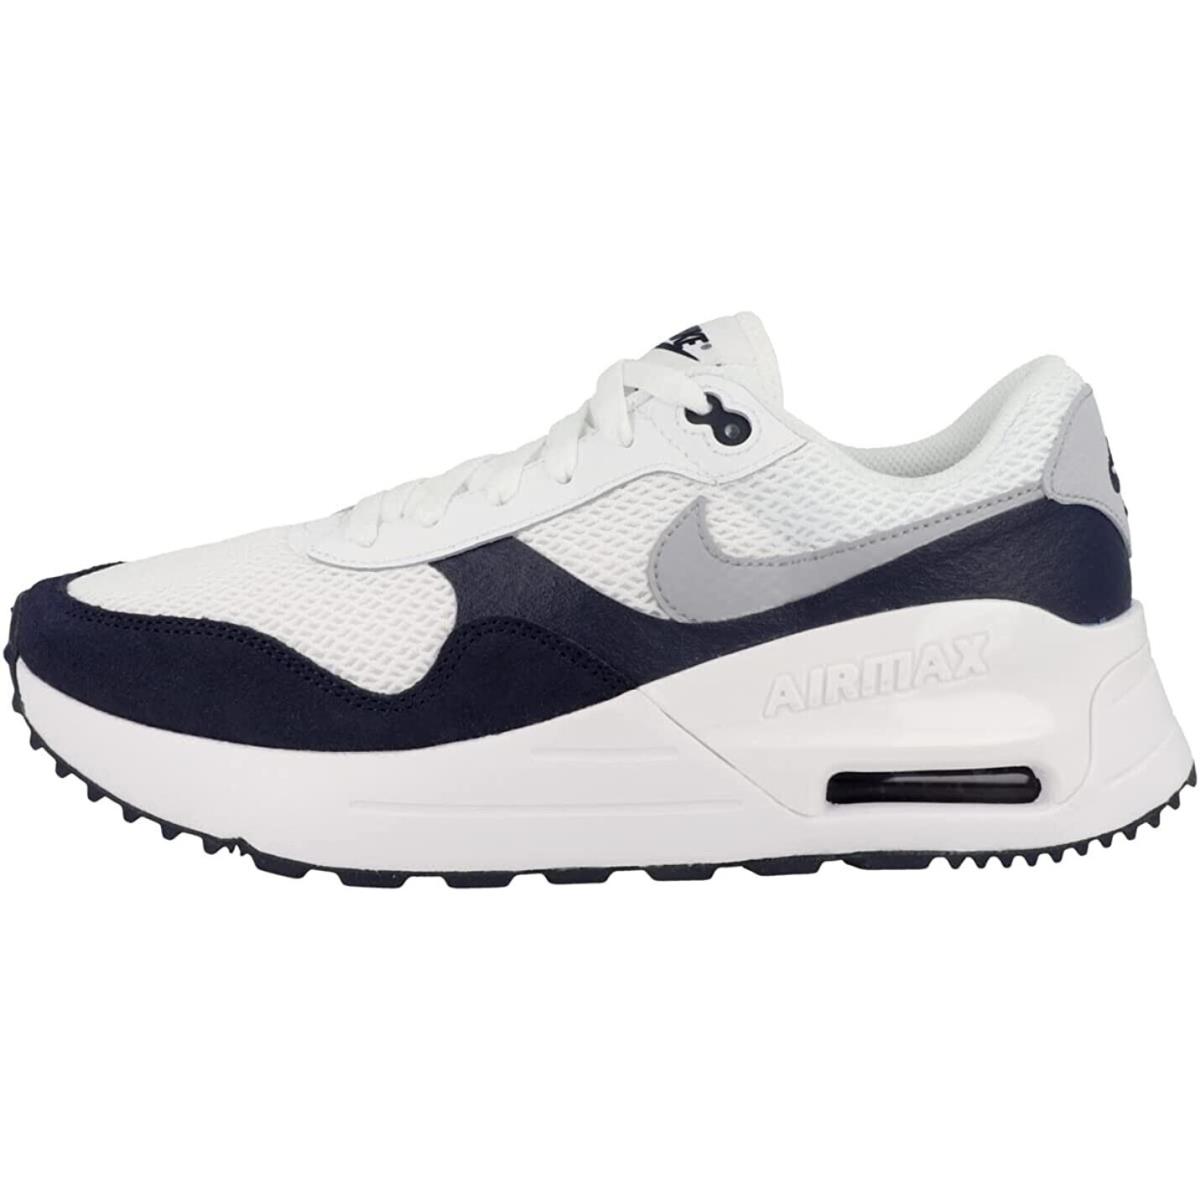 Nike Mens Air Max Systm Running Shoes DM9537 102 - white wolf grey obsidian